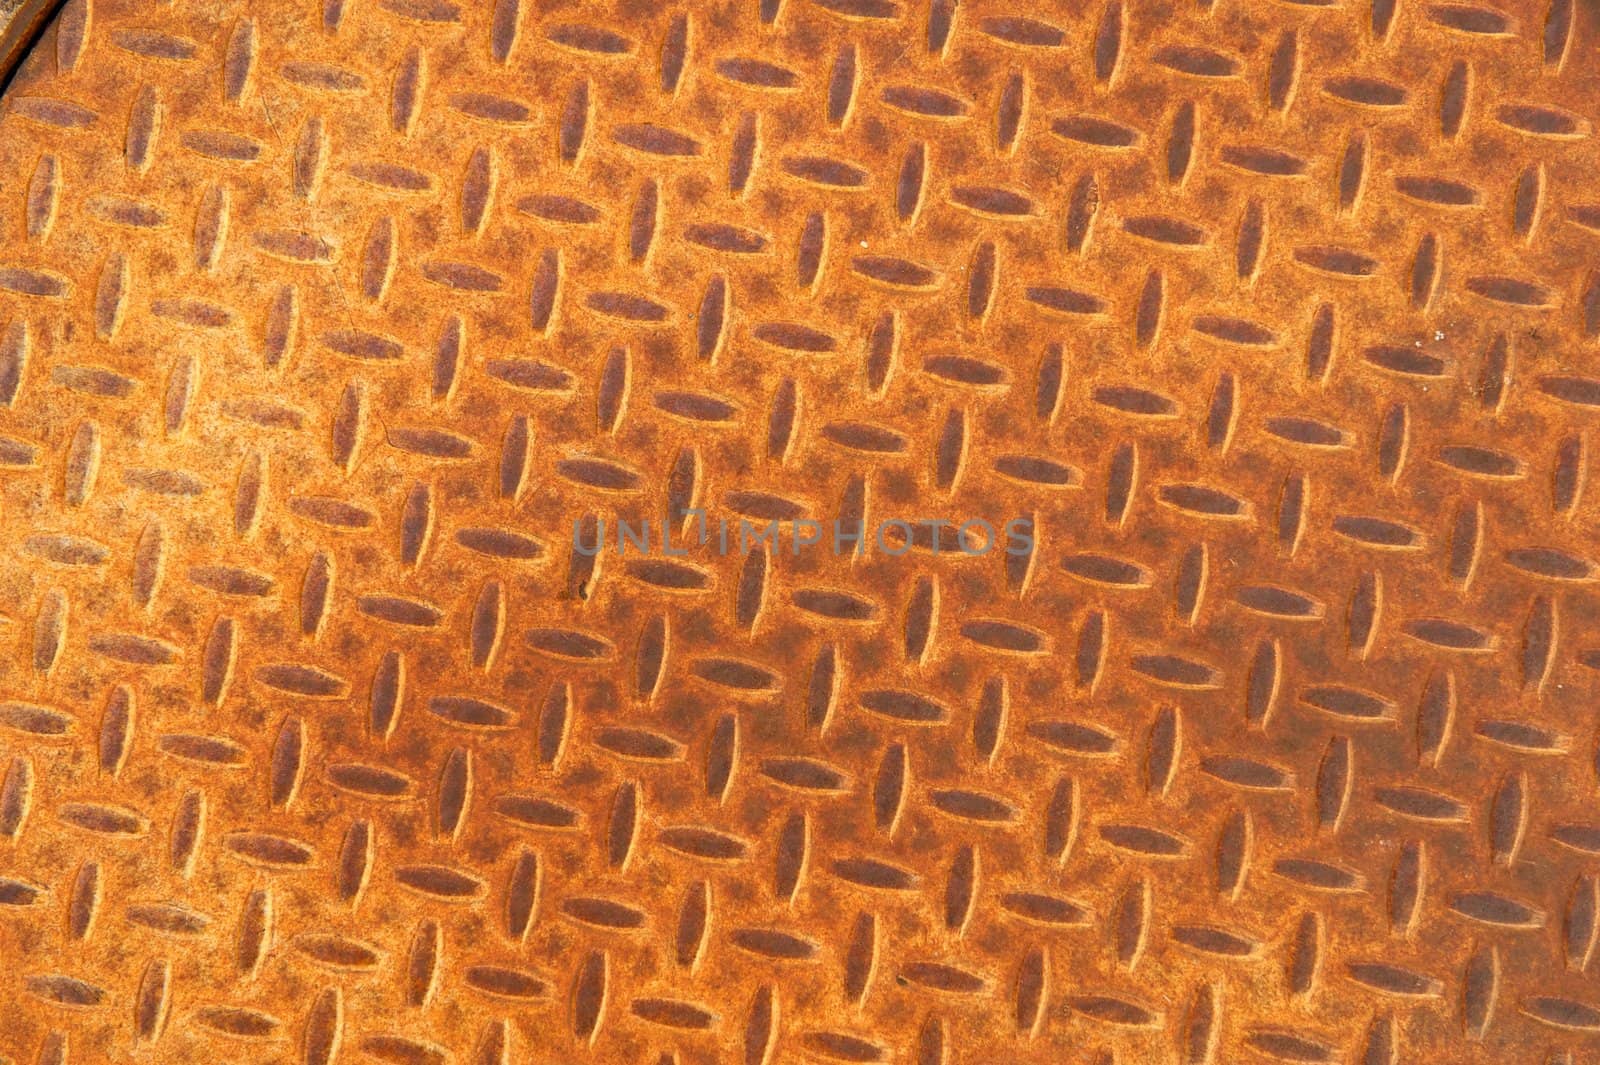 Rusted Metal Manhole Cover with Herringbone Pattern by pixelsnap